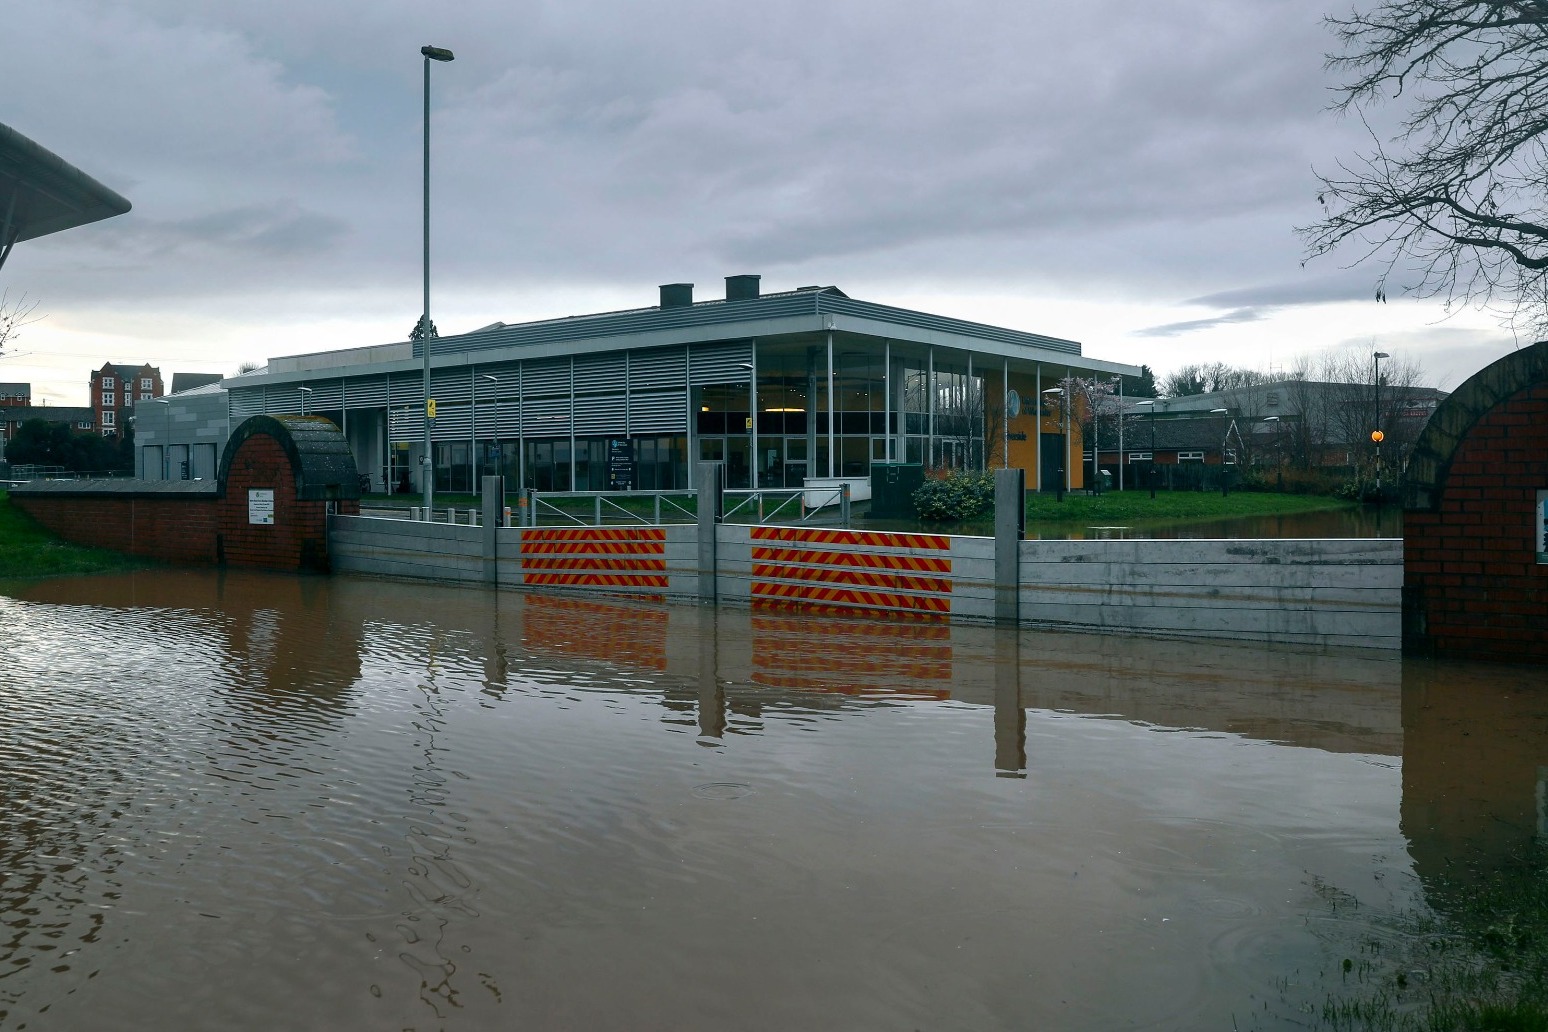 Homes remain under threat from rising flood levels 